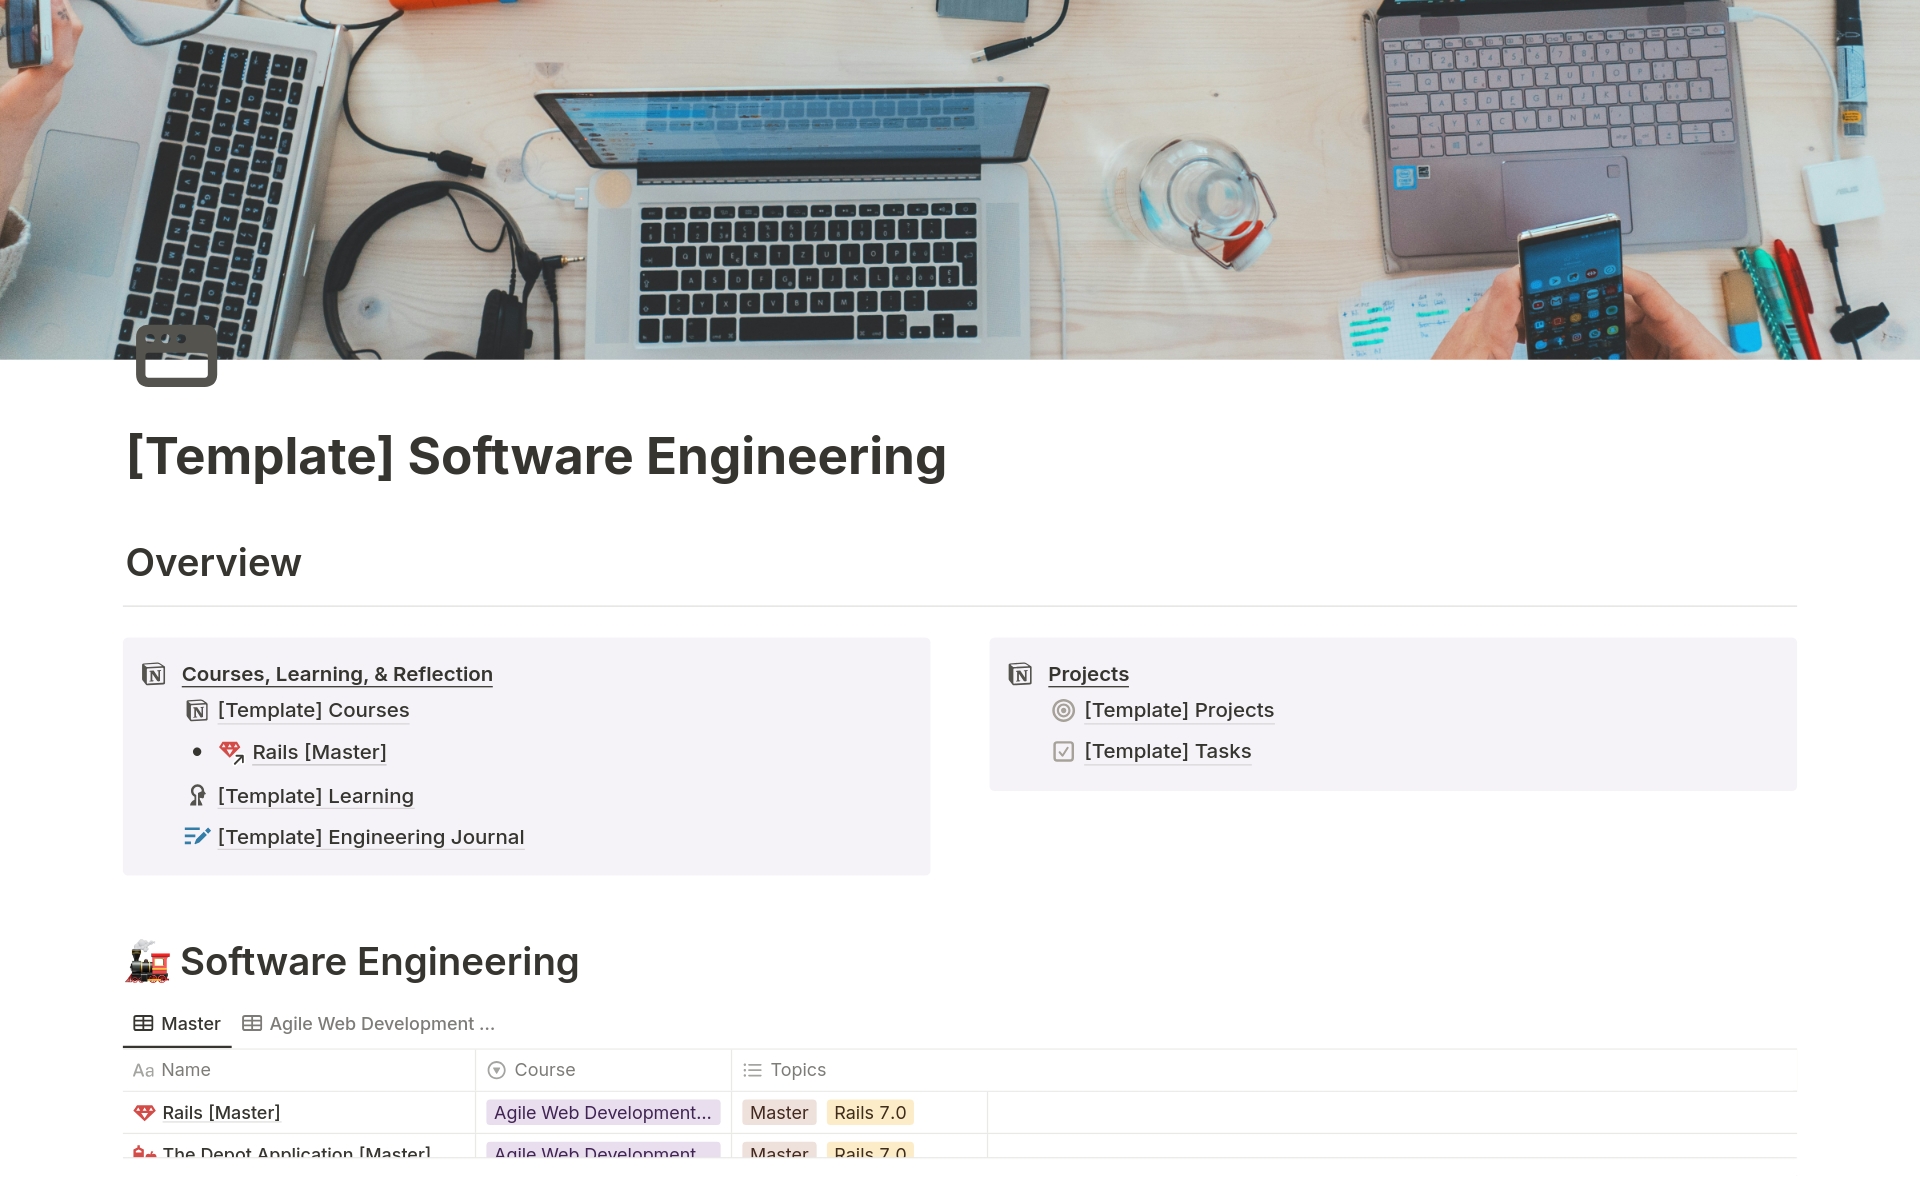 Maximize productivity with the Software Engineer's Notion Template! Organize course notes, compile learnings, track projects, and reflect on progress—all in one place. Ideal for efficiently managing your development journey.